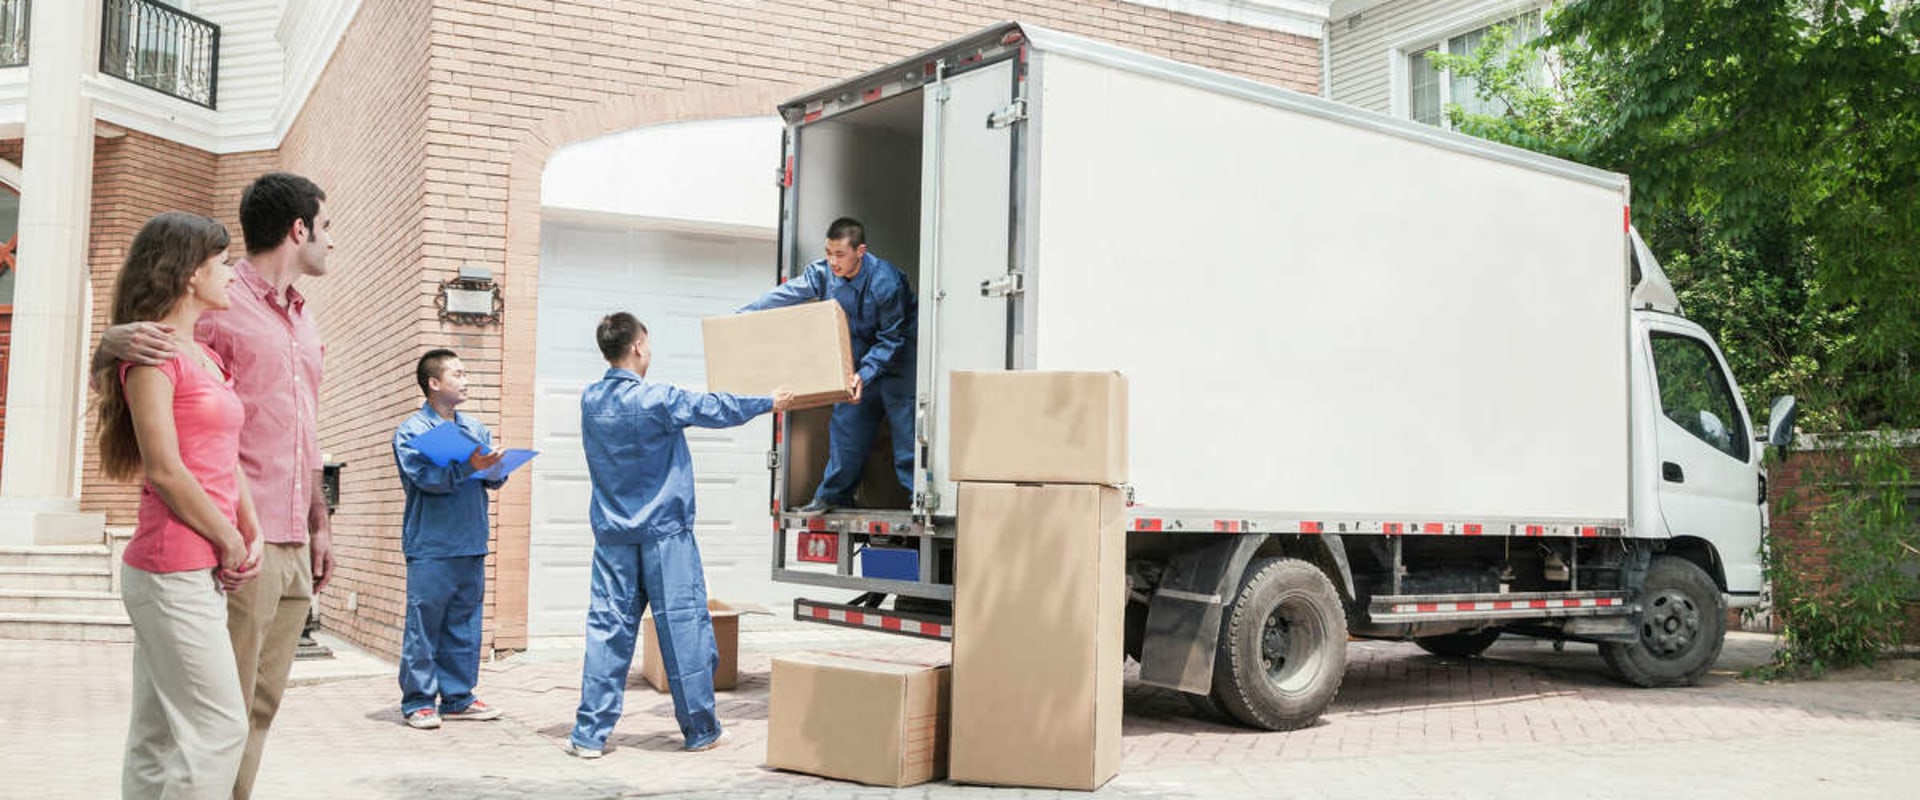 How to Choose the Right Moving Company for Your Relocation